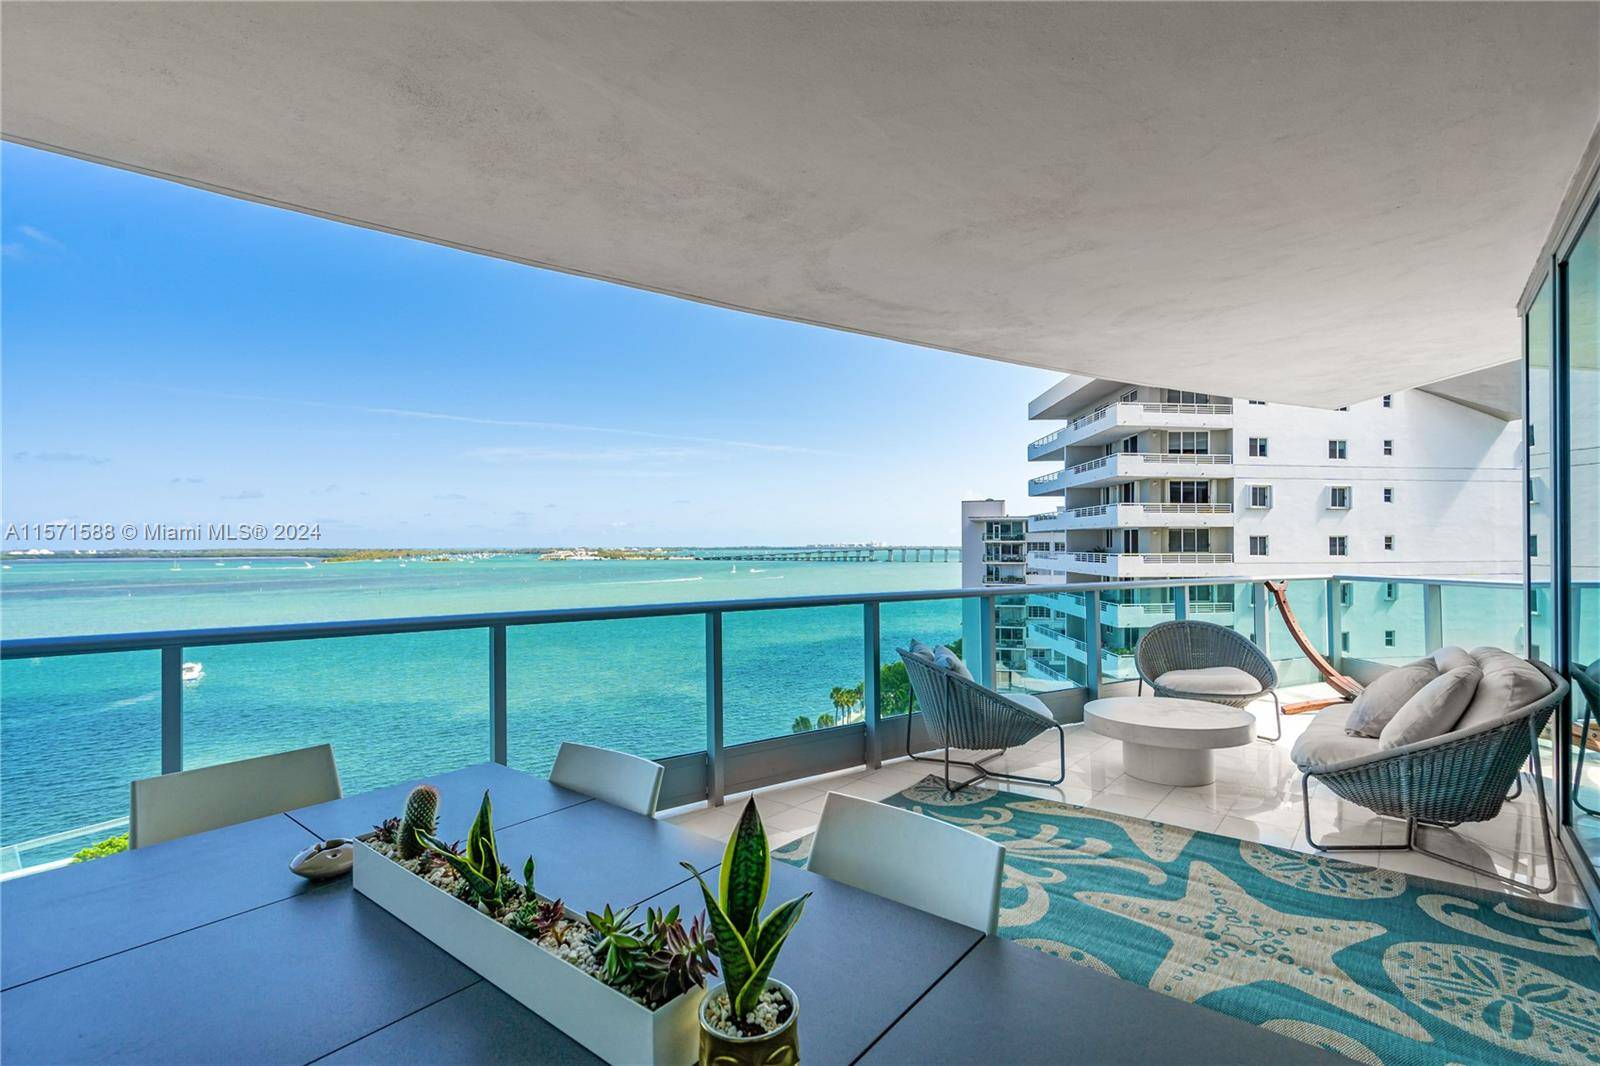 Experience luxury waterfront living in the heart of Brickell with this sophisticated resort style unit boasting stunning views and unparalleled elegance.